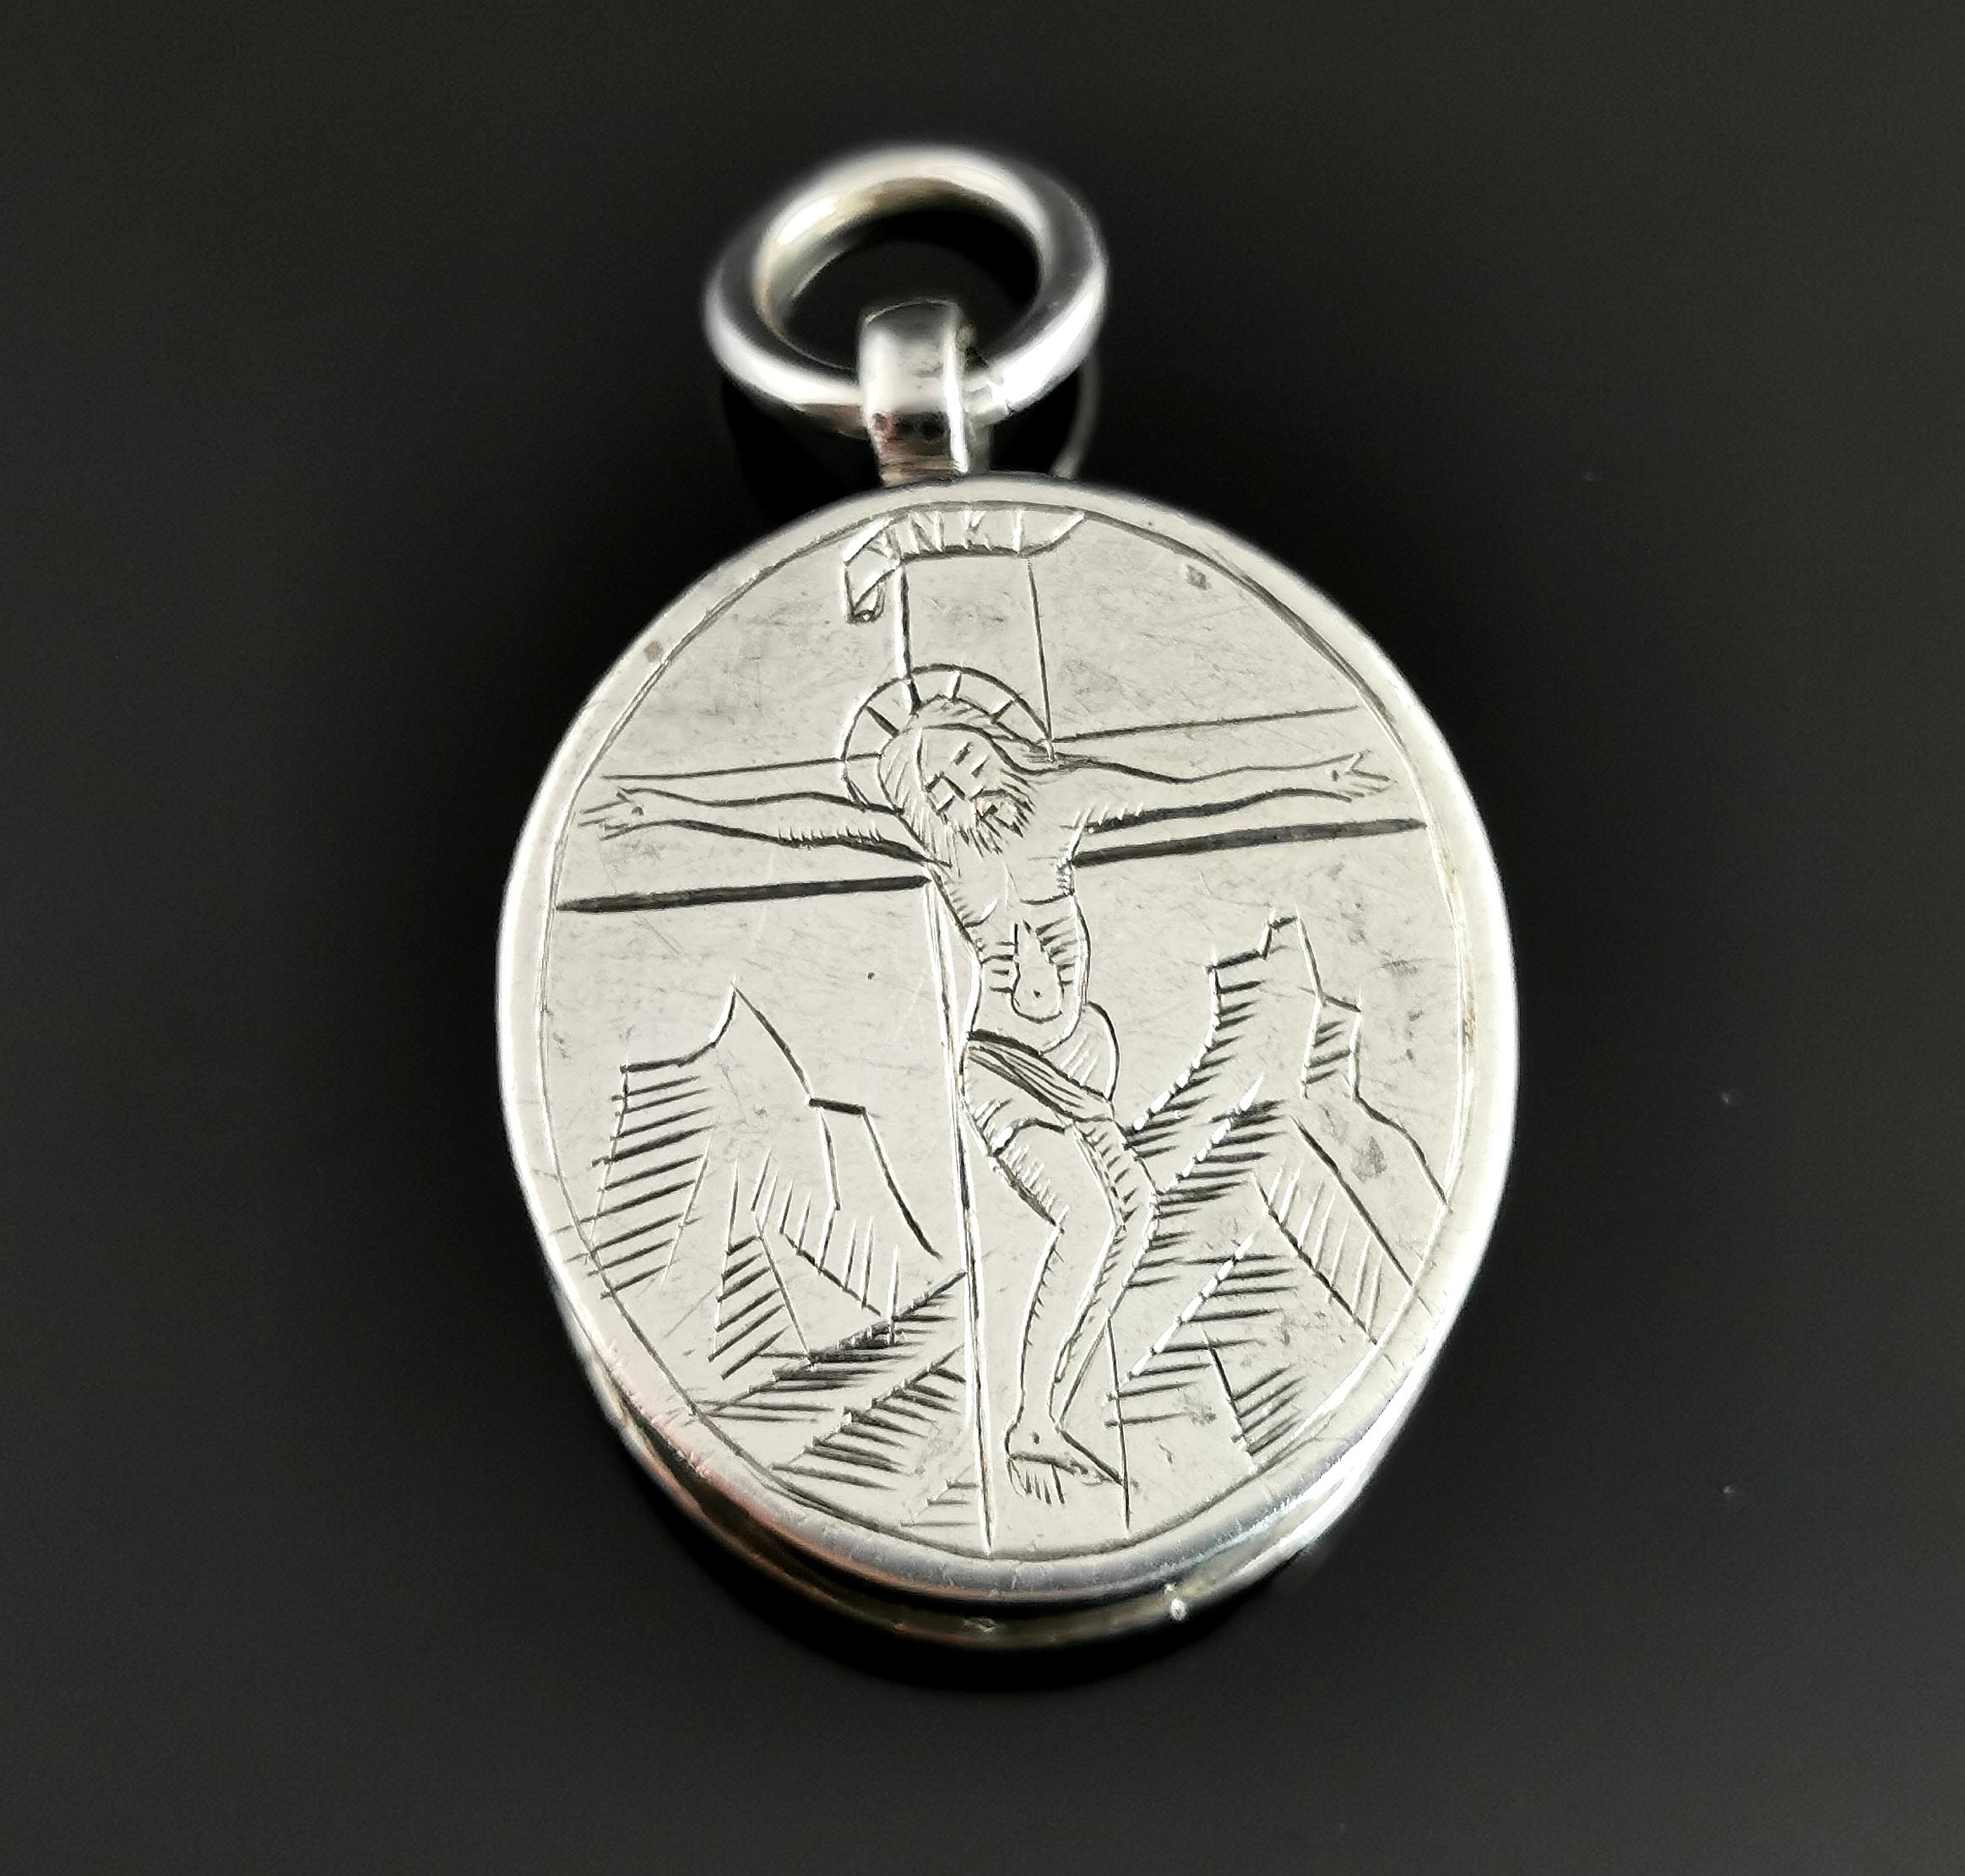 A beautiful and unusual antique silver reliquary locket pendant.

To the front of the locket there is a naively engraved image of Jesus crucified on the cross with the inscription INRI to the top.

The other side has a picture of Mary holding baby